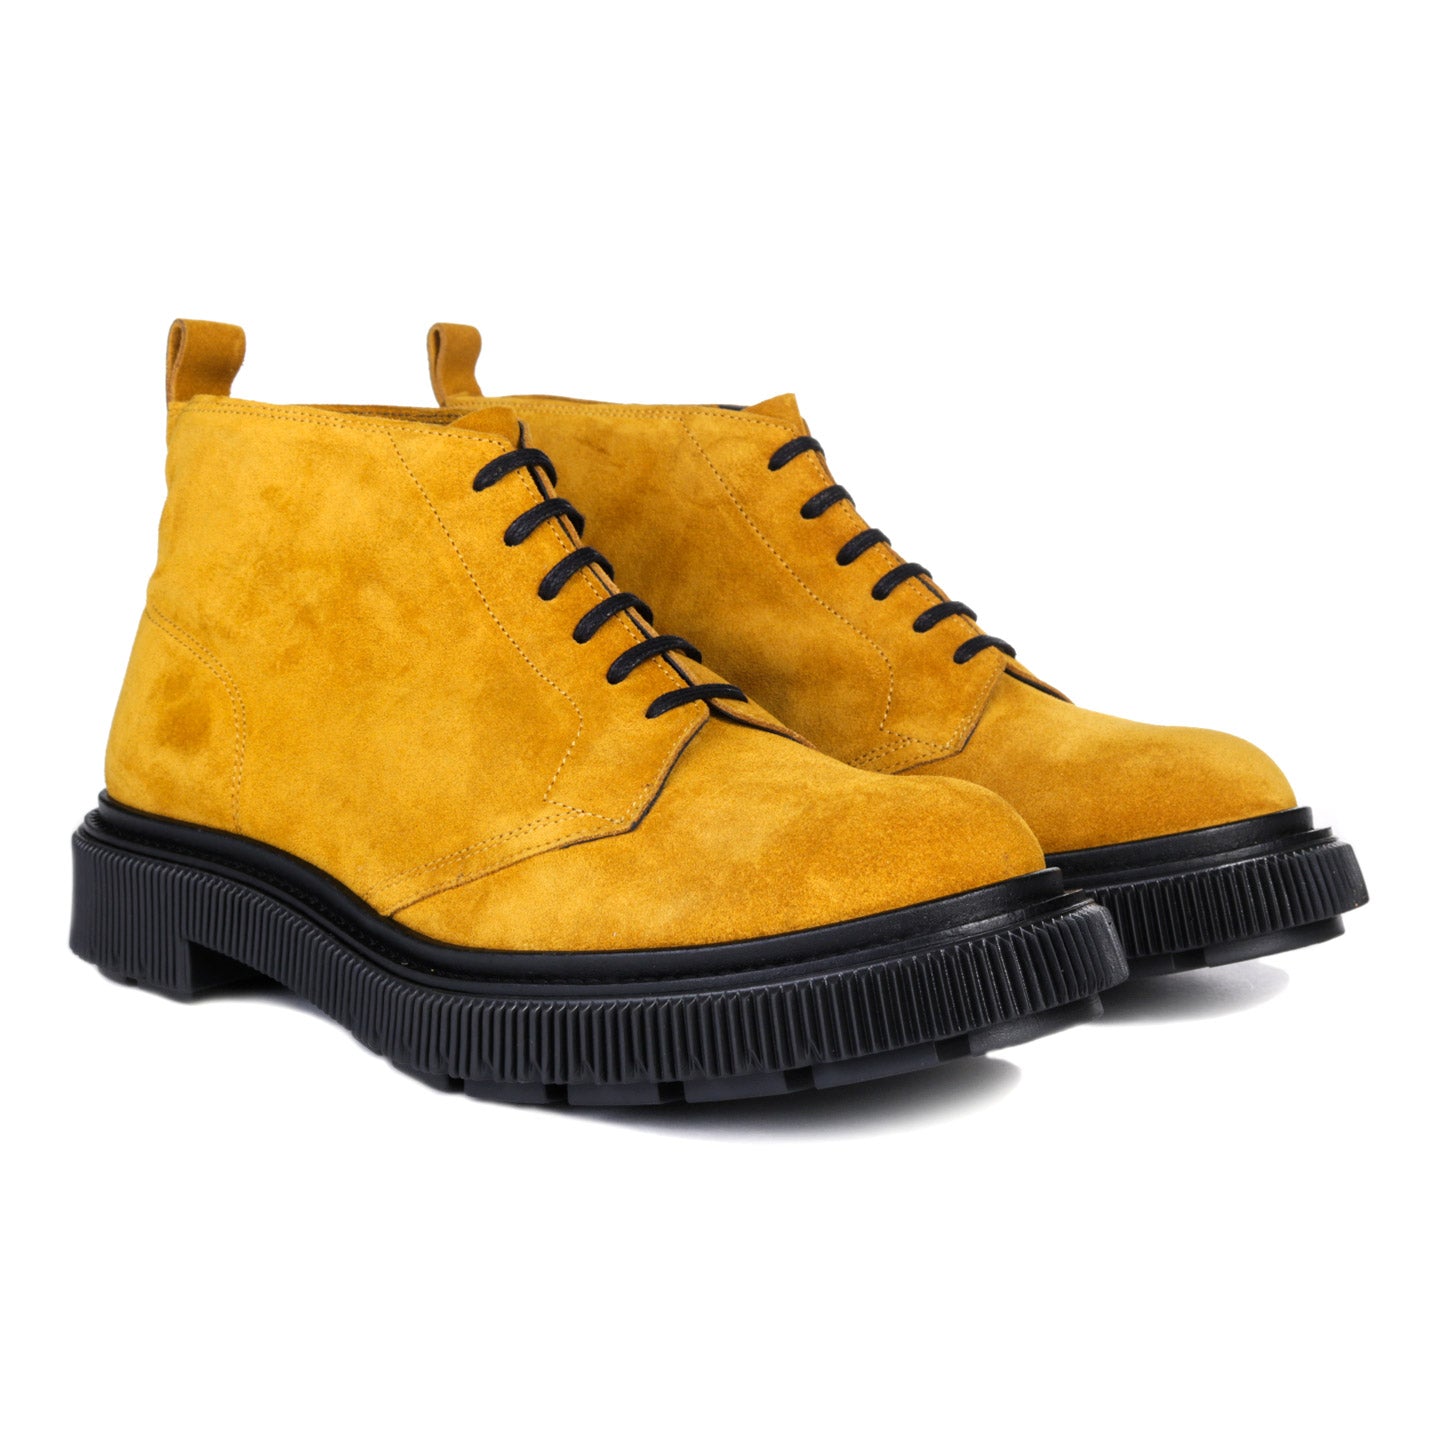 ADIEU TYPE 121 BOOT SUEDE GINGERBREAD